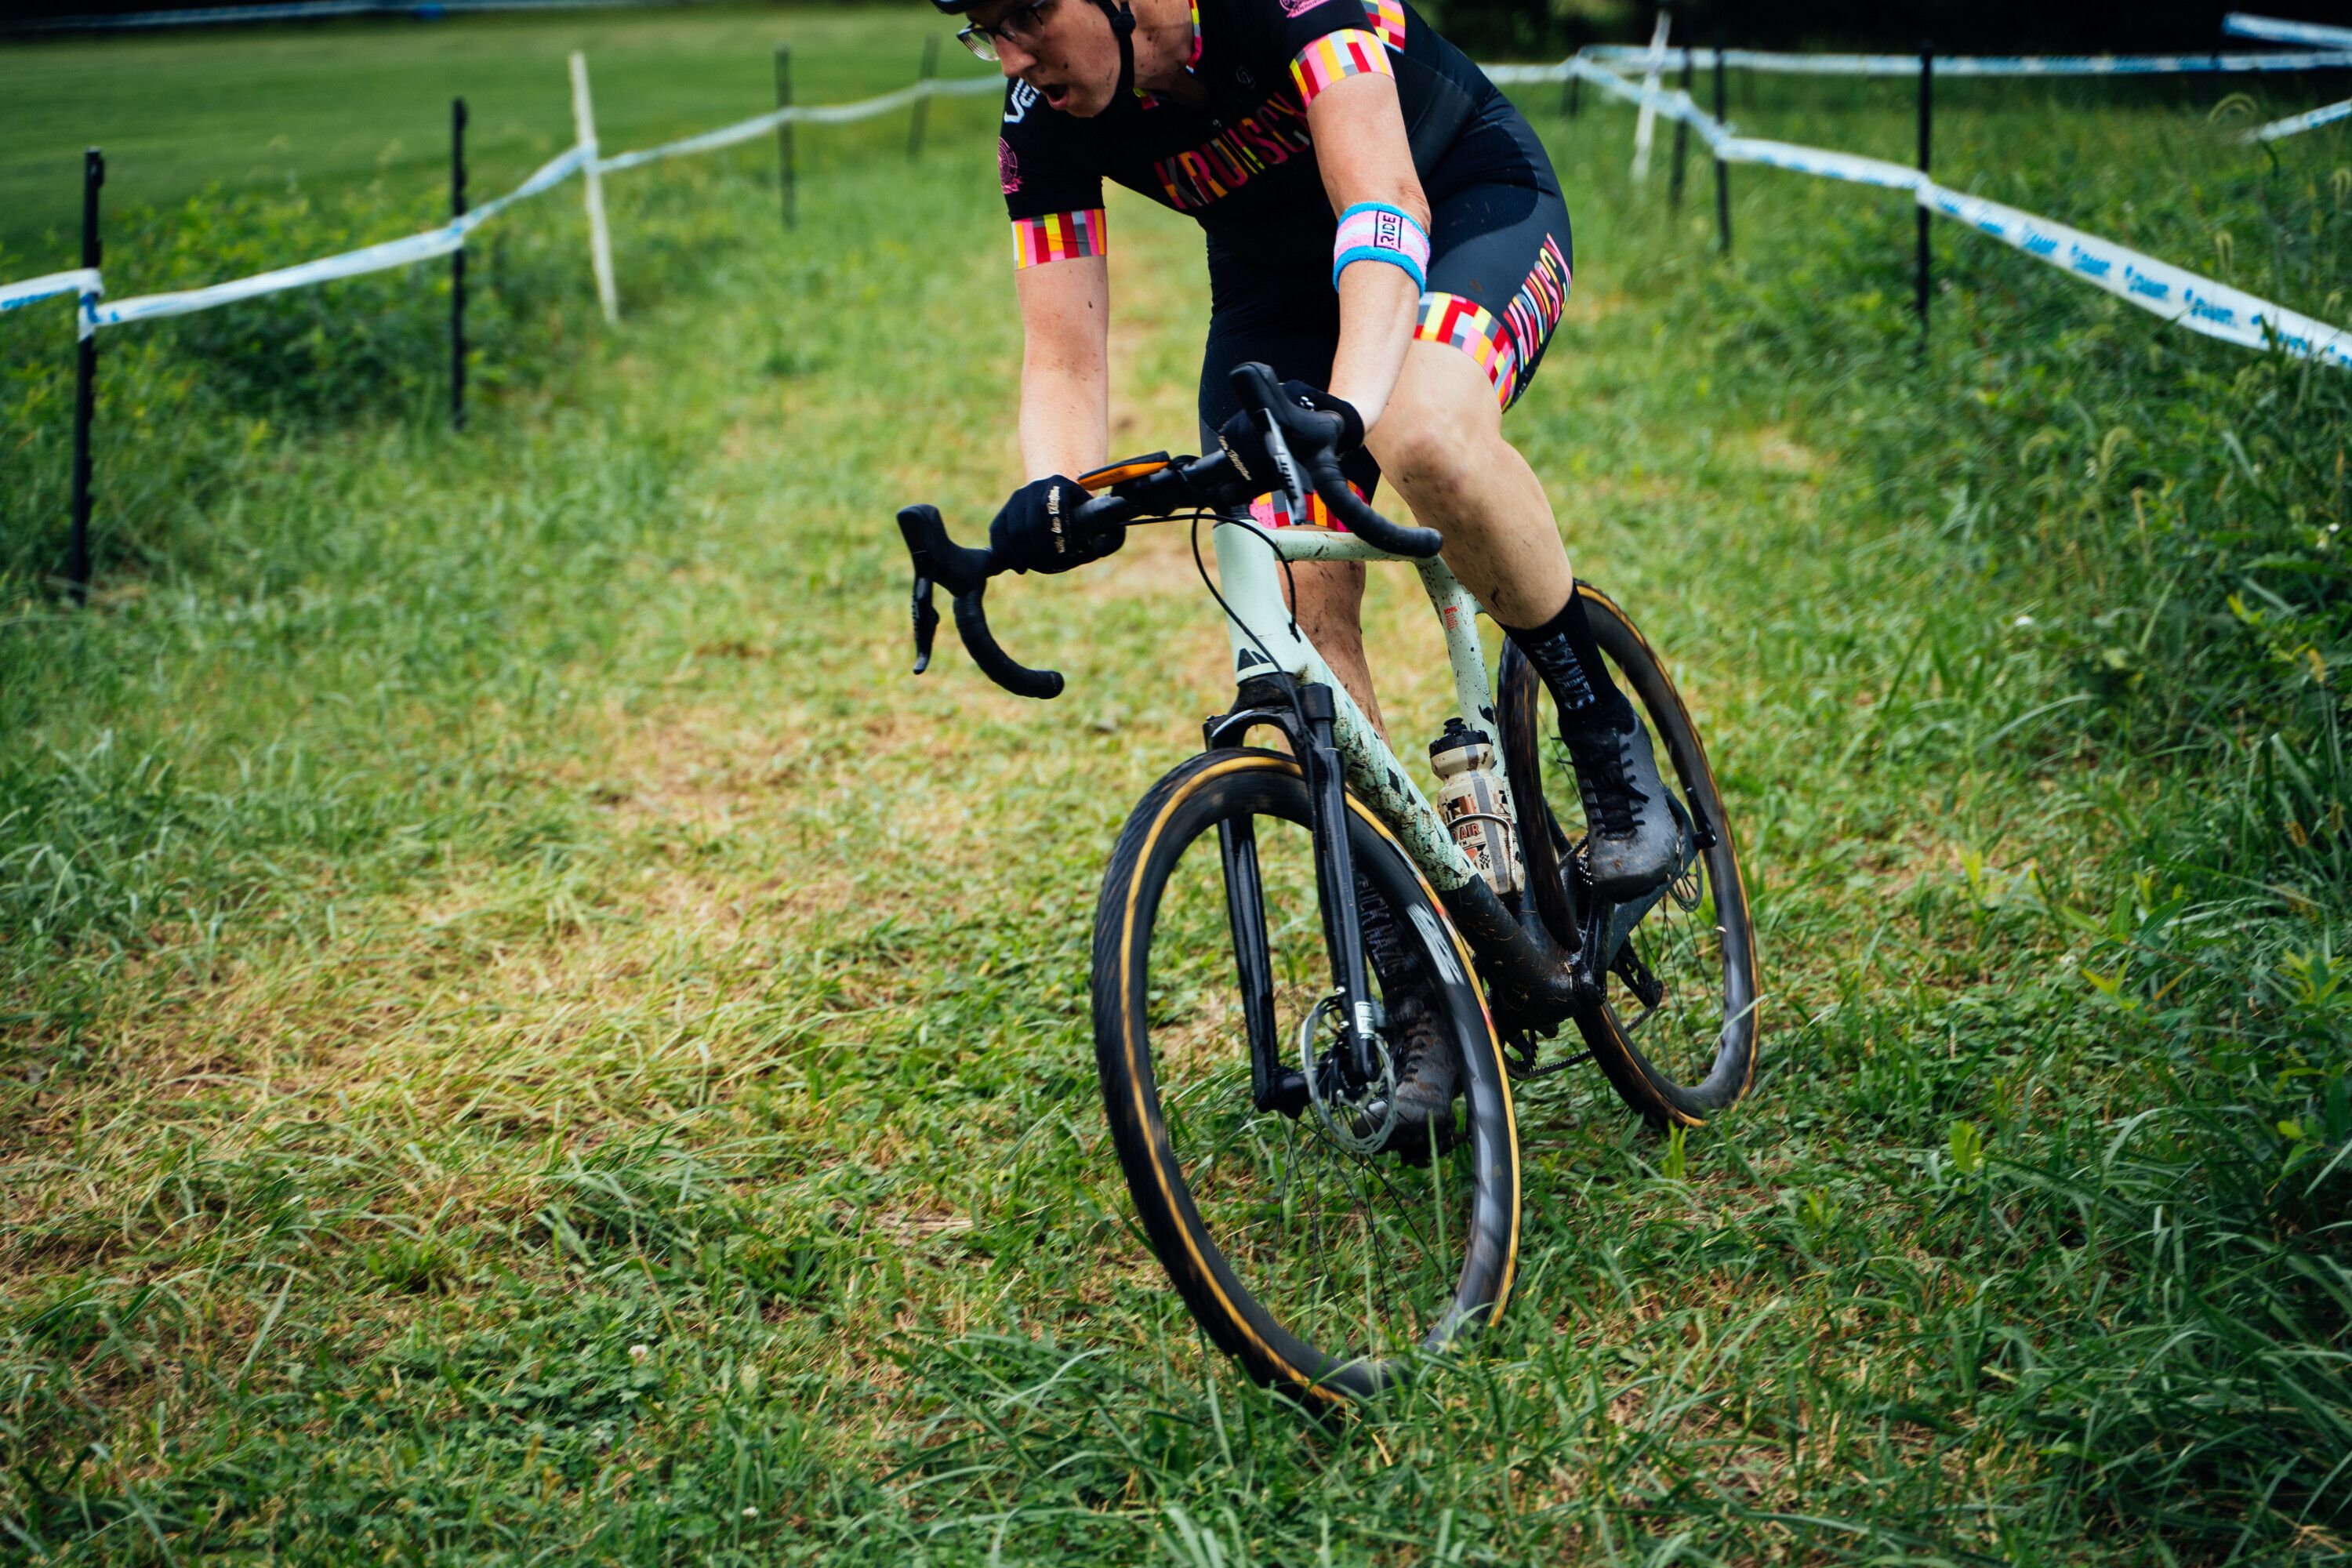 How to Watch the 2022-2023 Cyclocross Season